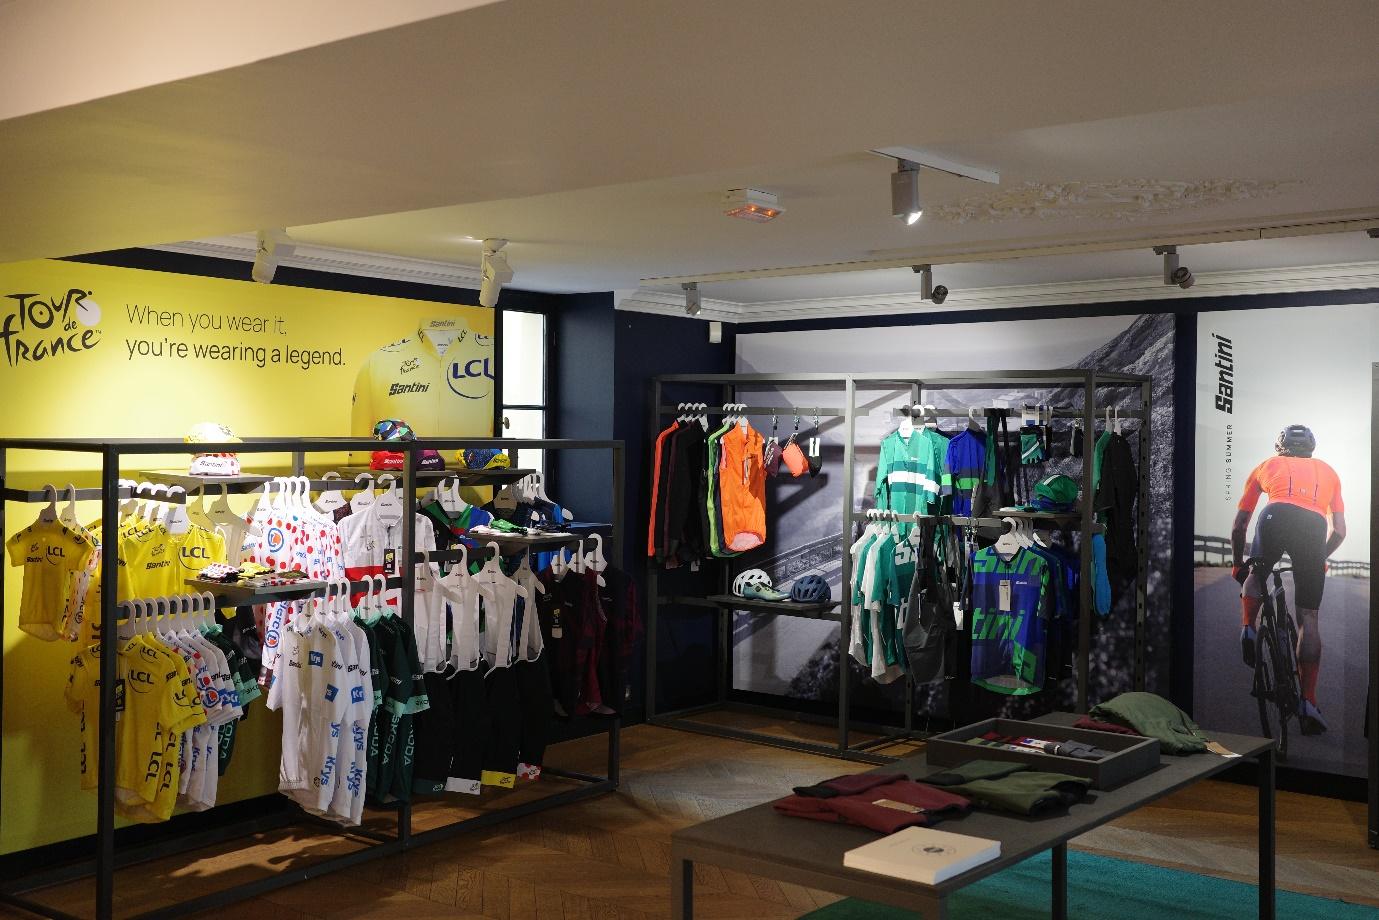 Santini to launch visual merchandising packages at COREbike - News ...